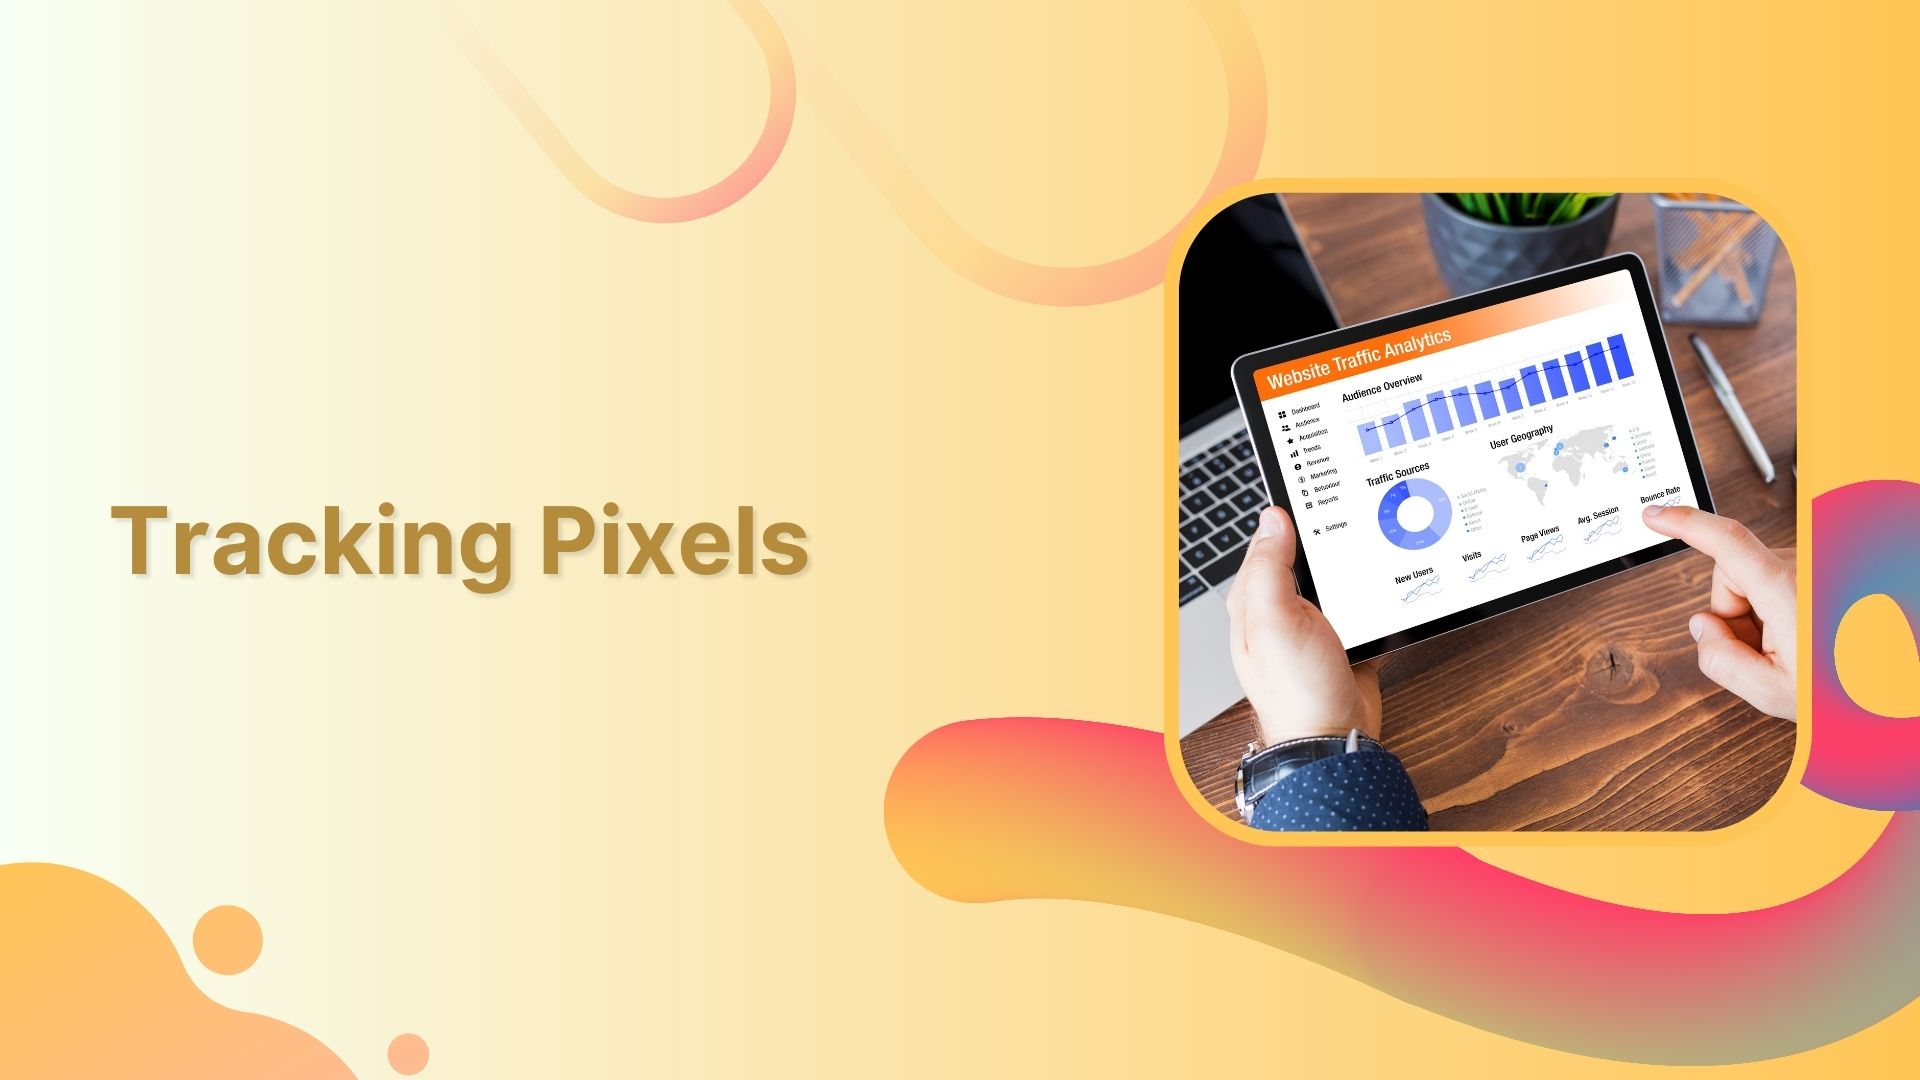 What Are Tracking Pixels & How Do They Work?